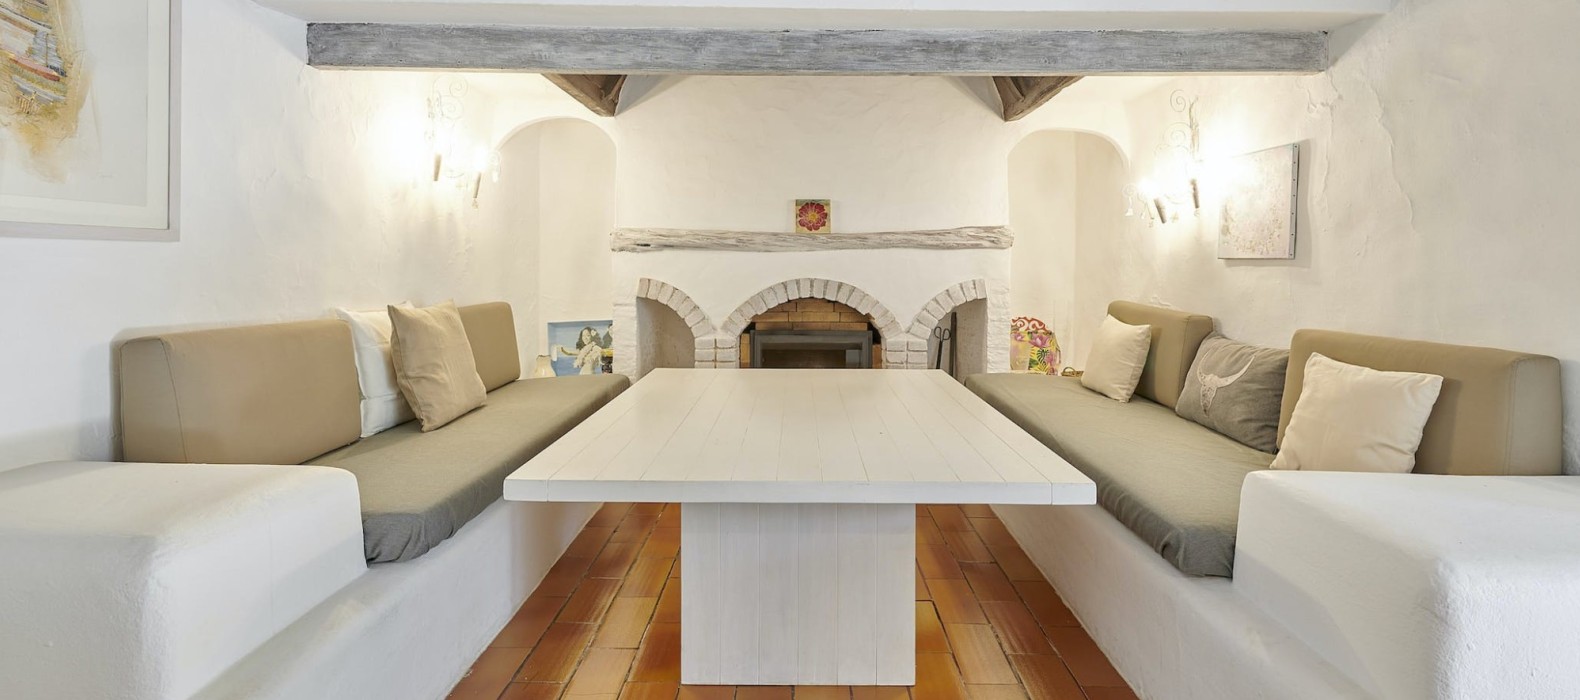 Dining room with oven of Finca Traditionale in Ibiza